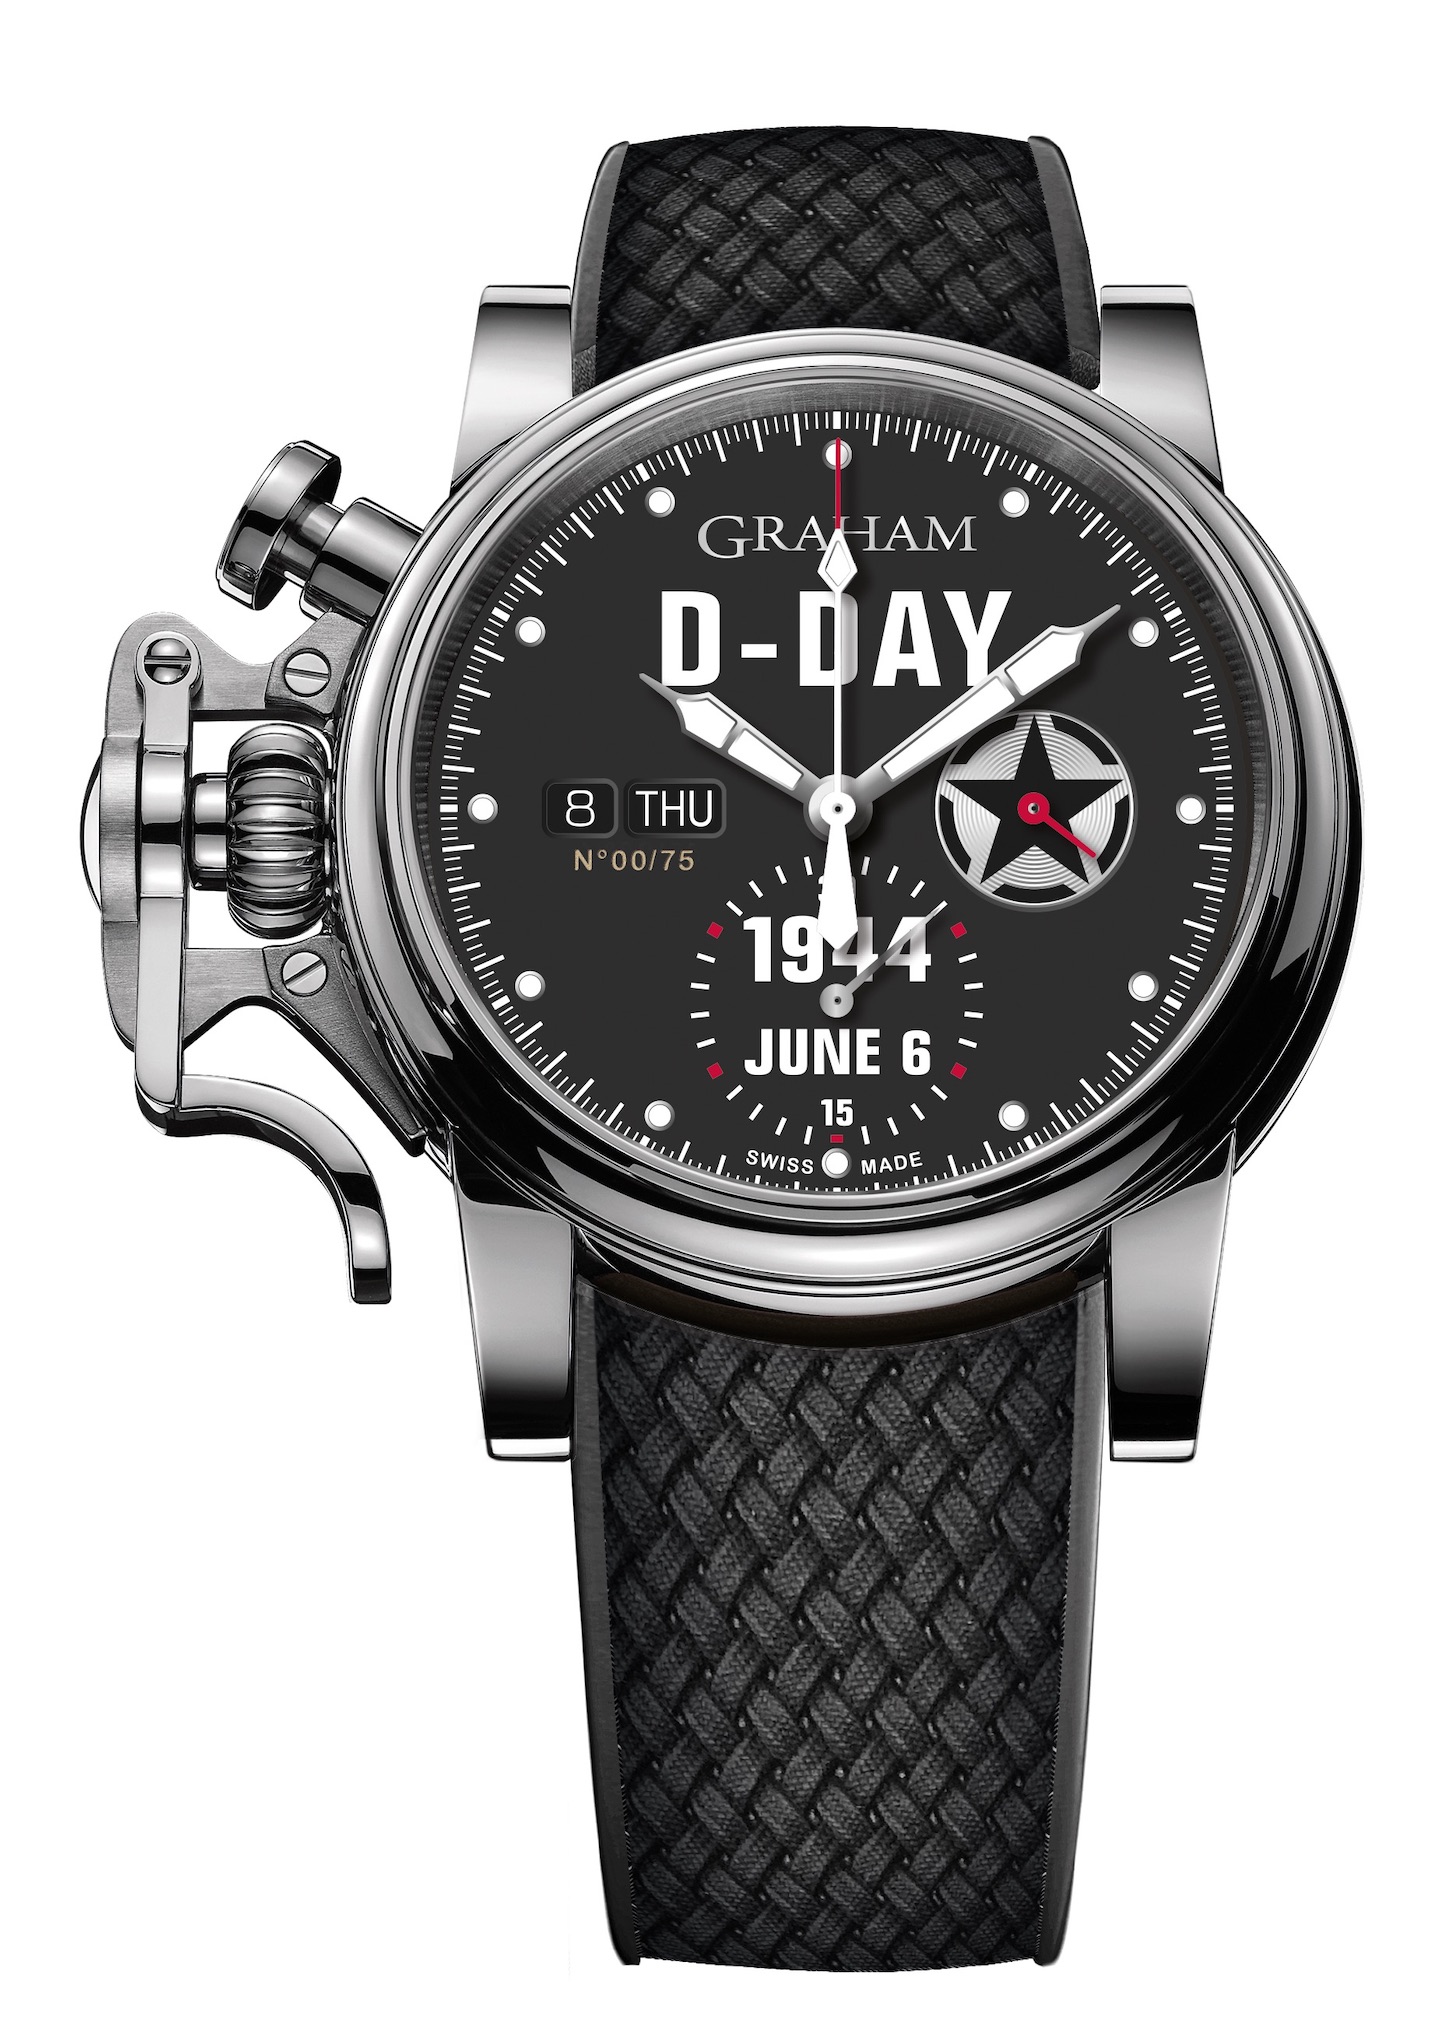 Graham Chronofighter Vintage D-Day watch. 